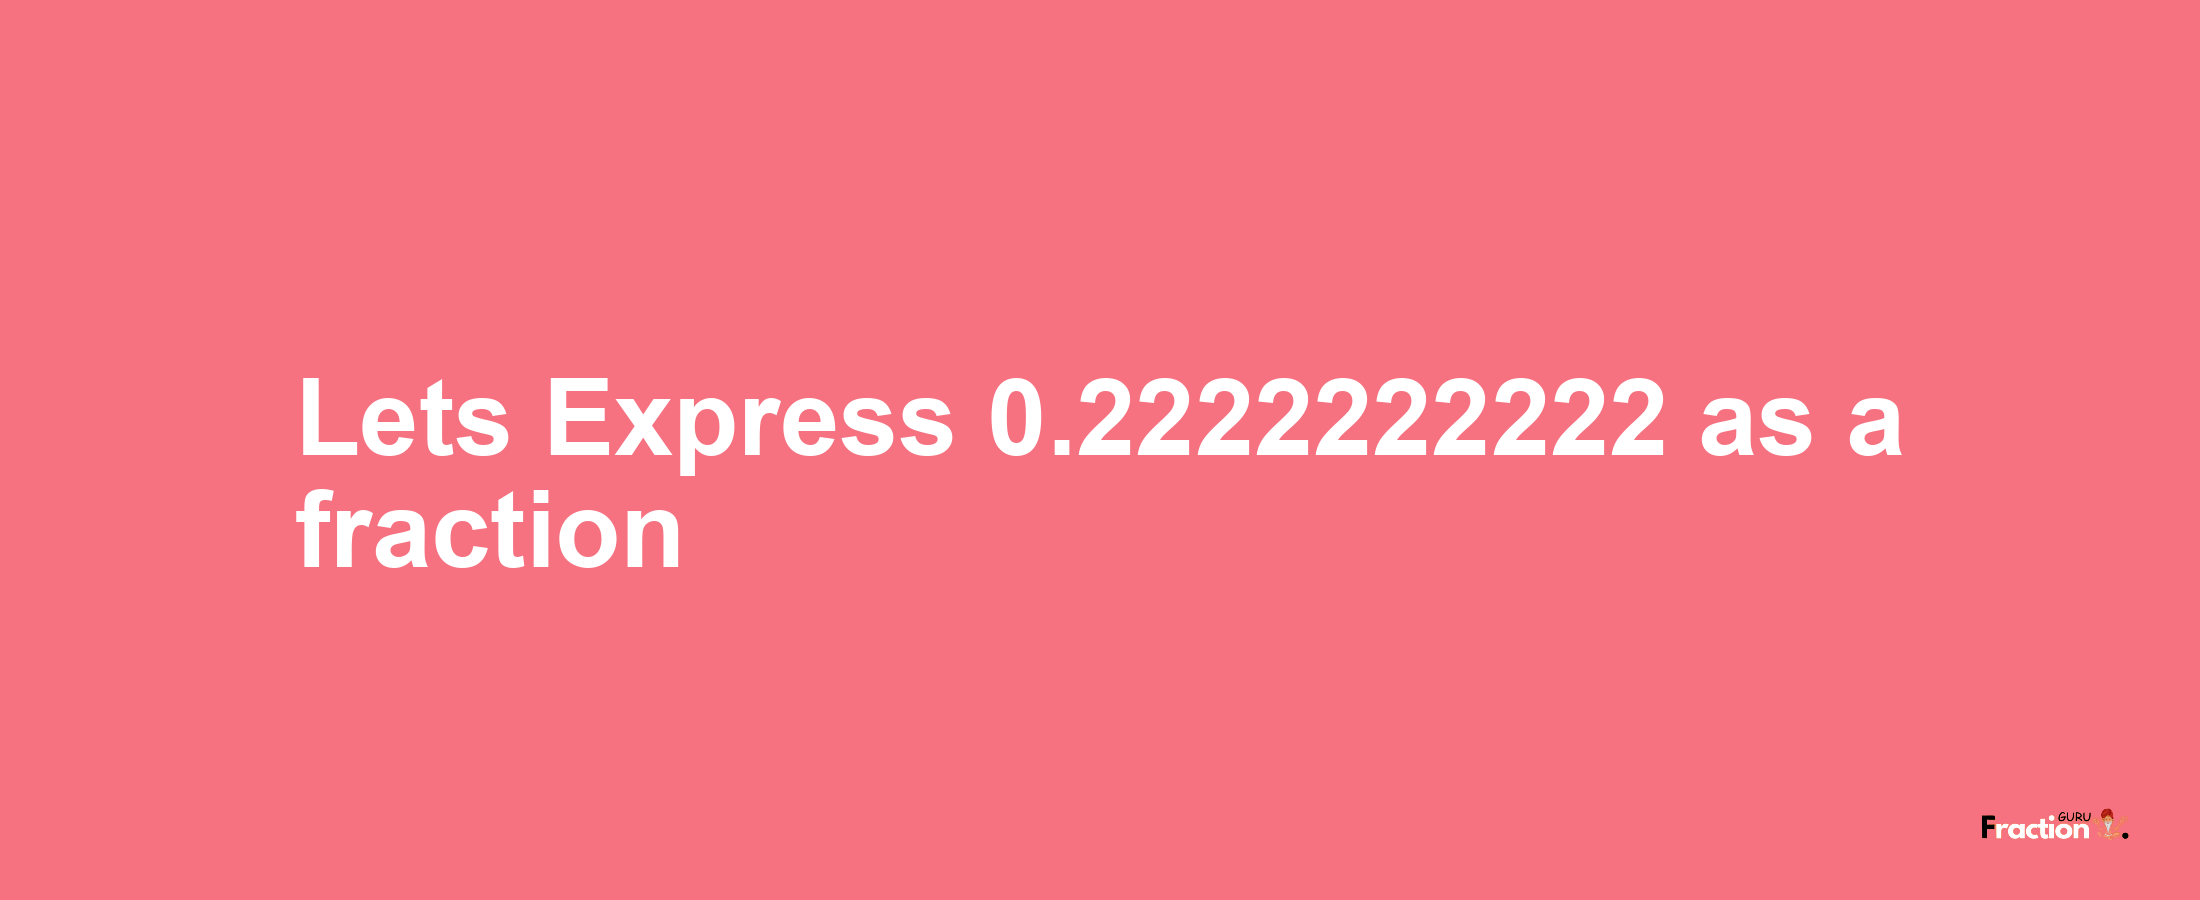 Lets Express 0.2222222222 as afraction